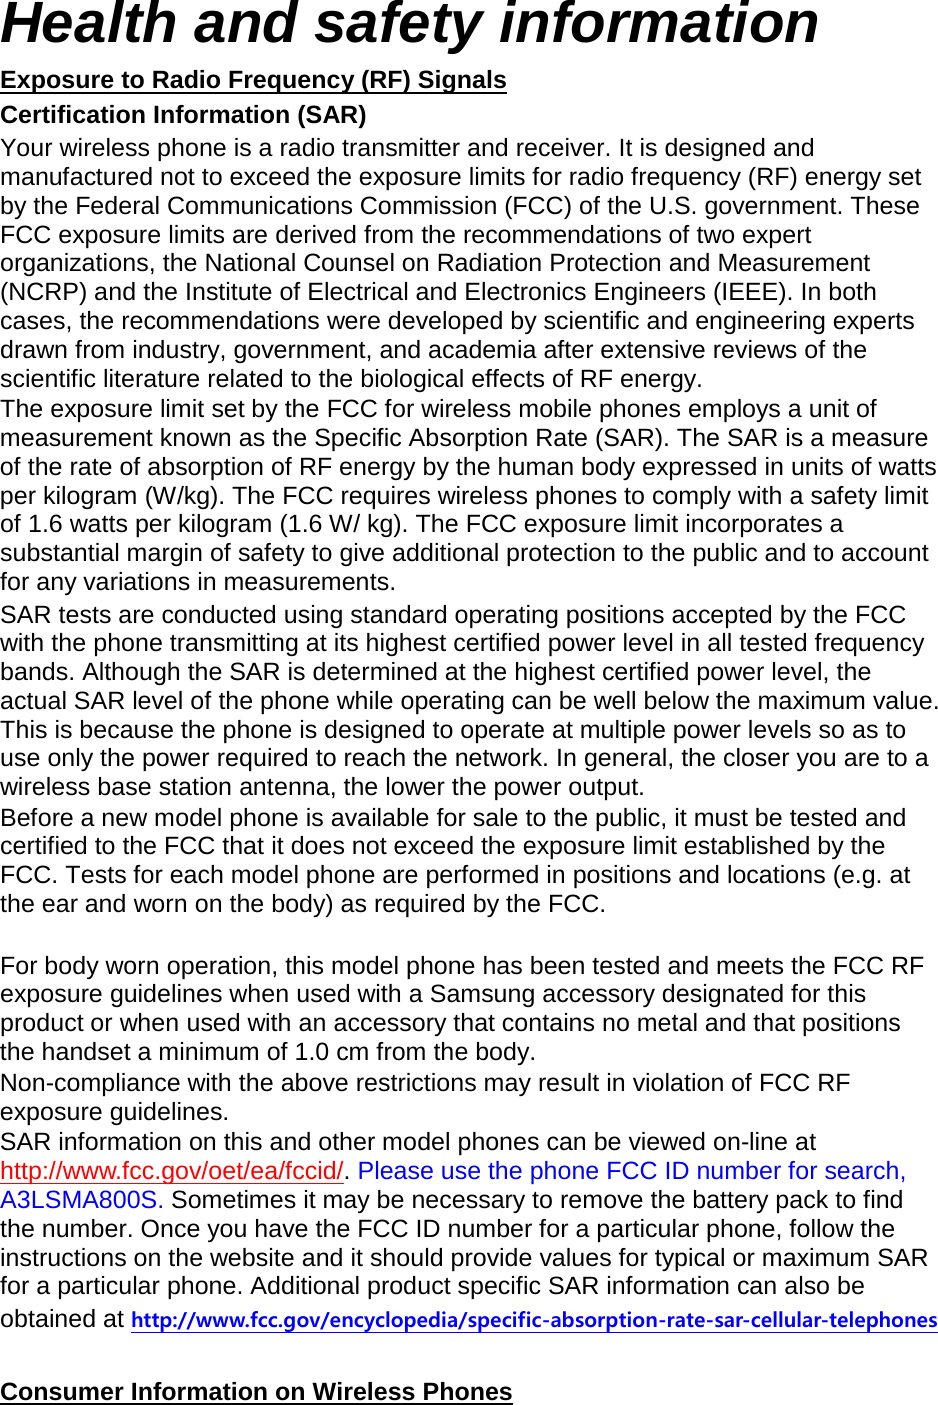 Health and safety information Exposure to Radio Frequency (RF) Signals Certification Information (SAR) Your wireless phone is a radio transmitter and receiver. It is designed and manufactured not to exceed the exposure limits for radio frequency (RF) energy set by the Federal Communications Commission (FCC) of the U.S. government. These FCC exposure limits are derived from the recommendations of two expert organizations, the National Counsel on Radiation Protection and Measurement (NCRP) and the Institute of Electrical and Electronics Engineers (IEEE). In both cases, the recommendations were developed by scientific and engineering experts drawn from industry, government, and academia after extensive reviews of the scientific literature related to the biological effects of RF energy. The exposure limit set by the FCC for wireless mobile phones employs a unit of measurement known as the Specific Absorption Rate (SAR). The SAR is a measure of the rate of absorption of RF energy by the human body expressed in units of watts per kilogram (W/kg). The FCC requires wireless phones to comply with a safety limit of 1.6 watts per kilogram (1.6 W/ kg). The FCC exposure limit incorporates a substantial margin of safety to give additional protection to the public and to account for any variations in measurements. SAR tests are conducted using standard operating positions accepted by the FCC with the phone transmitting at its highest certified power level in all tested frequency bands. Although the SAR is determined at the highest certified power level, the actual SAR level of the phone while operating can be well below the maximum value. This is because the phone is designed to operate at multiple power levels so as to use only the power required to reach the network. In general, the closer you are to a wireless base station antenna, the lower the power output. Before a new model phone is available for sale to the public, it must be tested and certified to the FCC that it does not exceed the exposure limit established by the FCC. Tests for each model phone are performed in positions and locations (e.g. at the ear and worn on the body) as required by the FCC.      For body worn operation, this model phone has been tested and meets the FCC RF exposure guidelines when used with a Samsung accessory designated for this product or when used with an accessory that contains no metal and that positions the handset a minimum of 1.0 cm from the body.   Non-compliance with the above restrictions may result in violation of FCC RF exposure guidelines. SAR information on this and other model phones can be viewed on-line at http://www.fcc.gov/oet/ea/fccid/. Please use the phone FCC ID number for search, A3LSMA800S. Sometimes it may be necessary to remove the battery pack to find the number. Once you have the FCC ID number for a particular phone, follow the instructions on the website and it should provide values for typical or maximum SAR for a particular phone. Additional product specific SAR information can also be obtained at http://www.fcc.gov/encyclopedia/specific-absorption-rate-sar-cellular-telephones  Consumer Information on Wireless Phones 